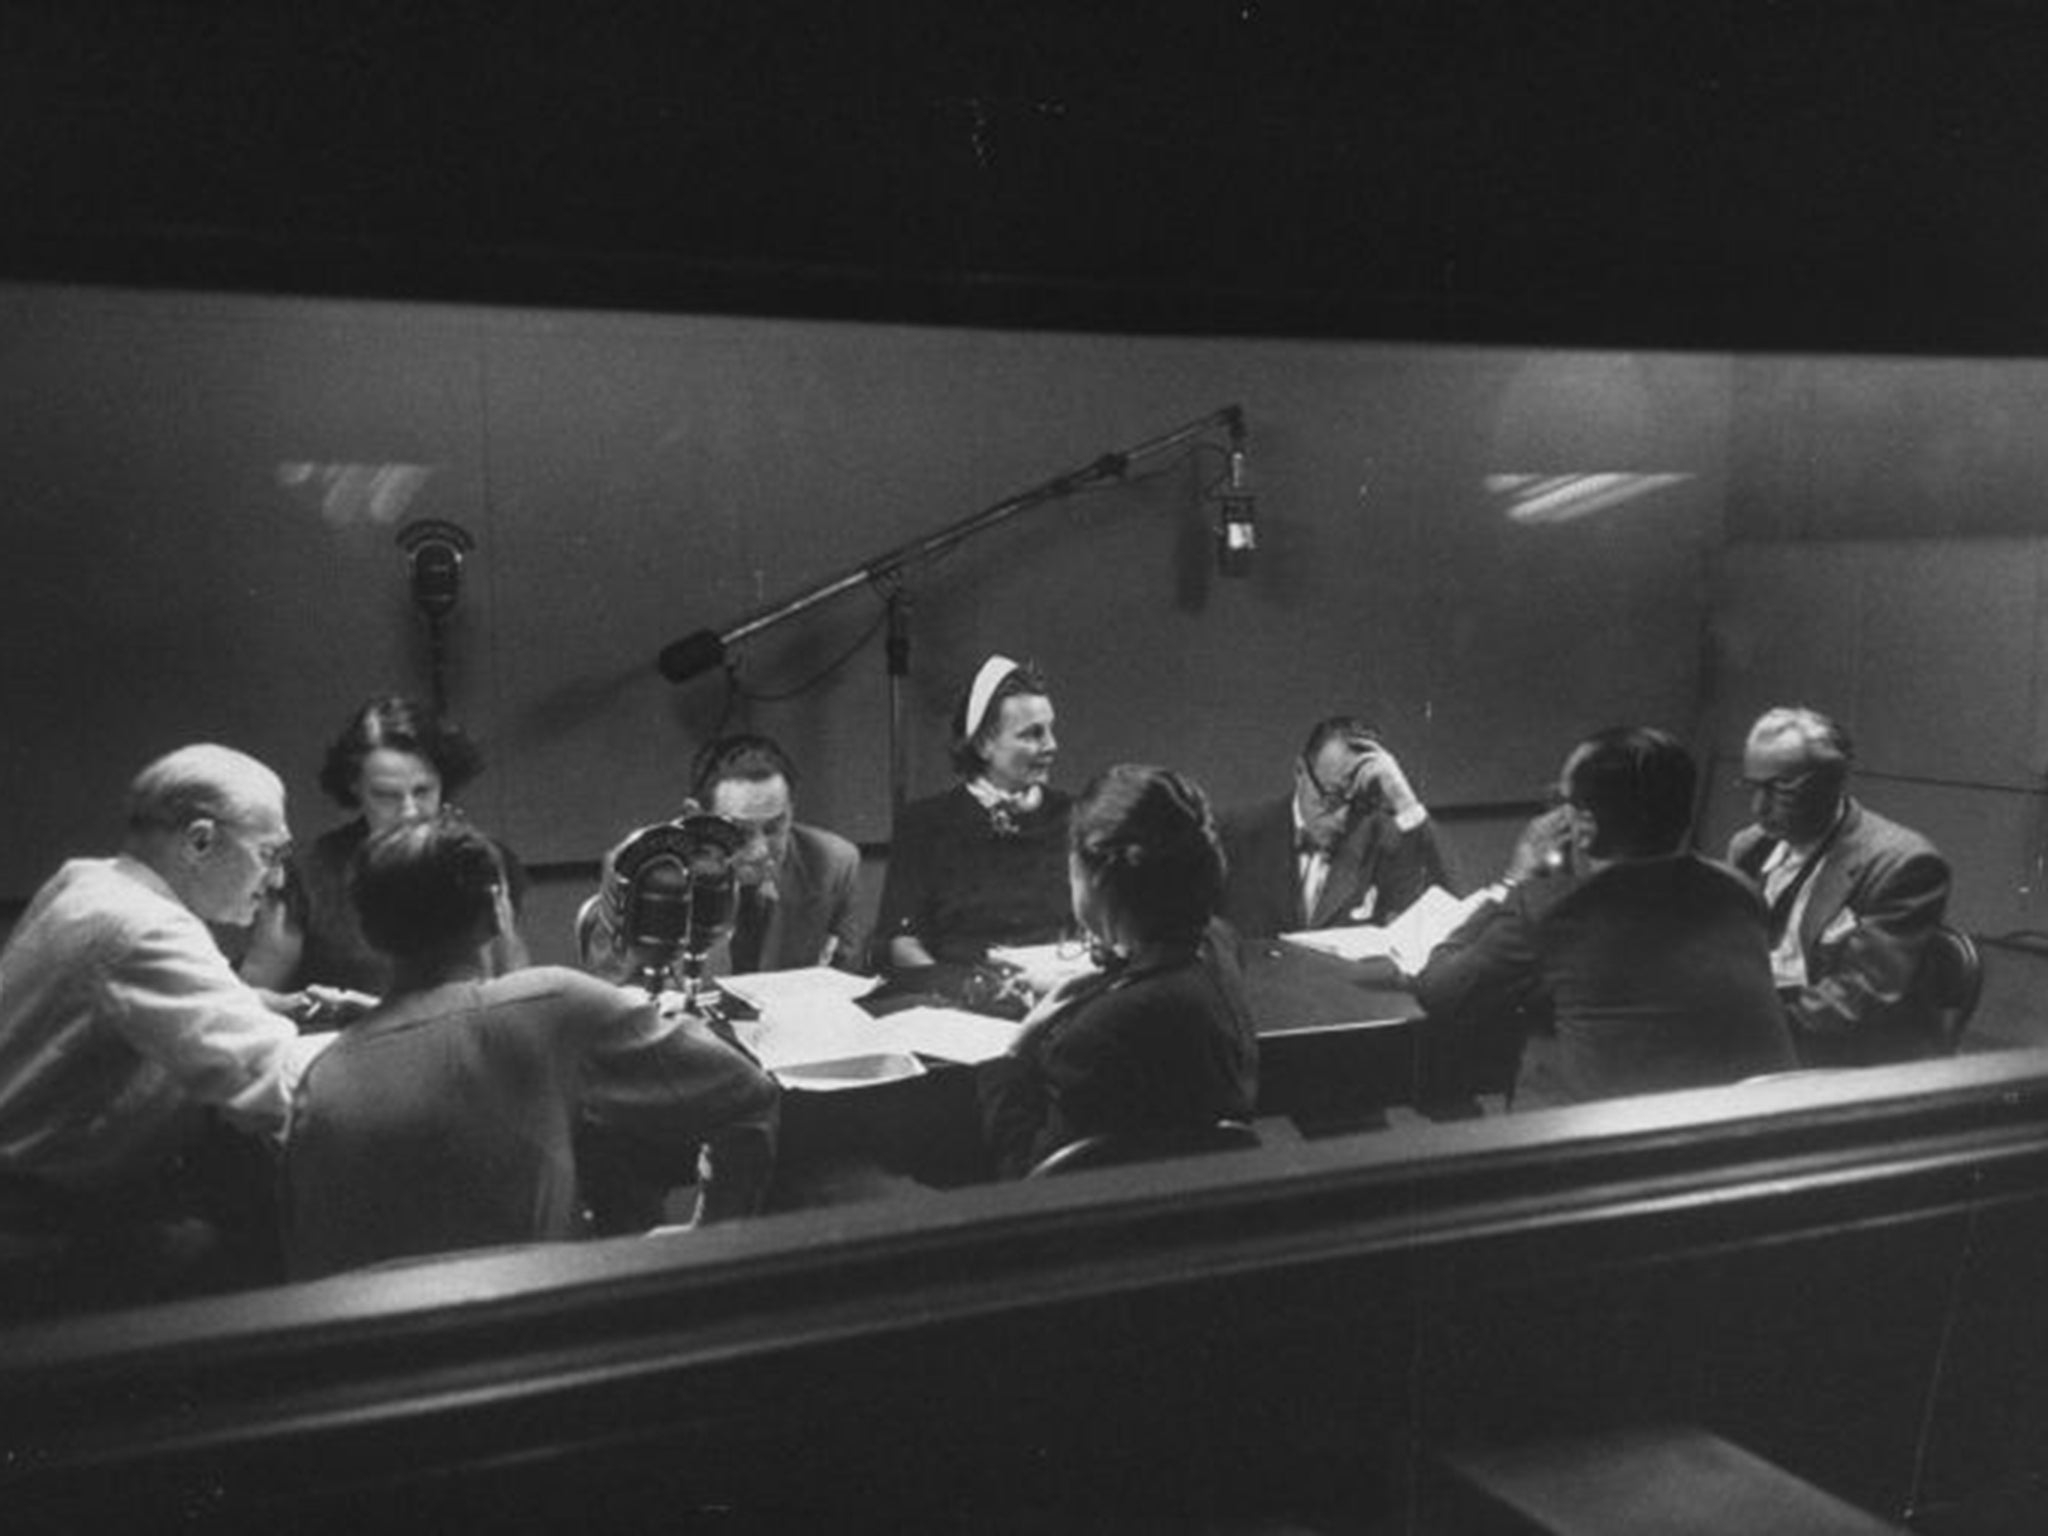 Voice of America in 1951. VoA was founded in 1942 to counter Nazi and Japanese broadcasts